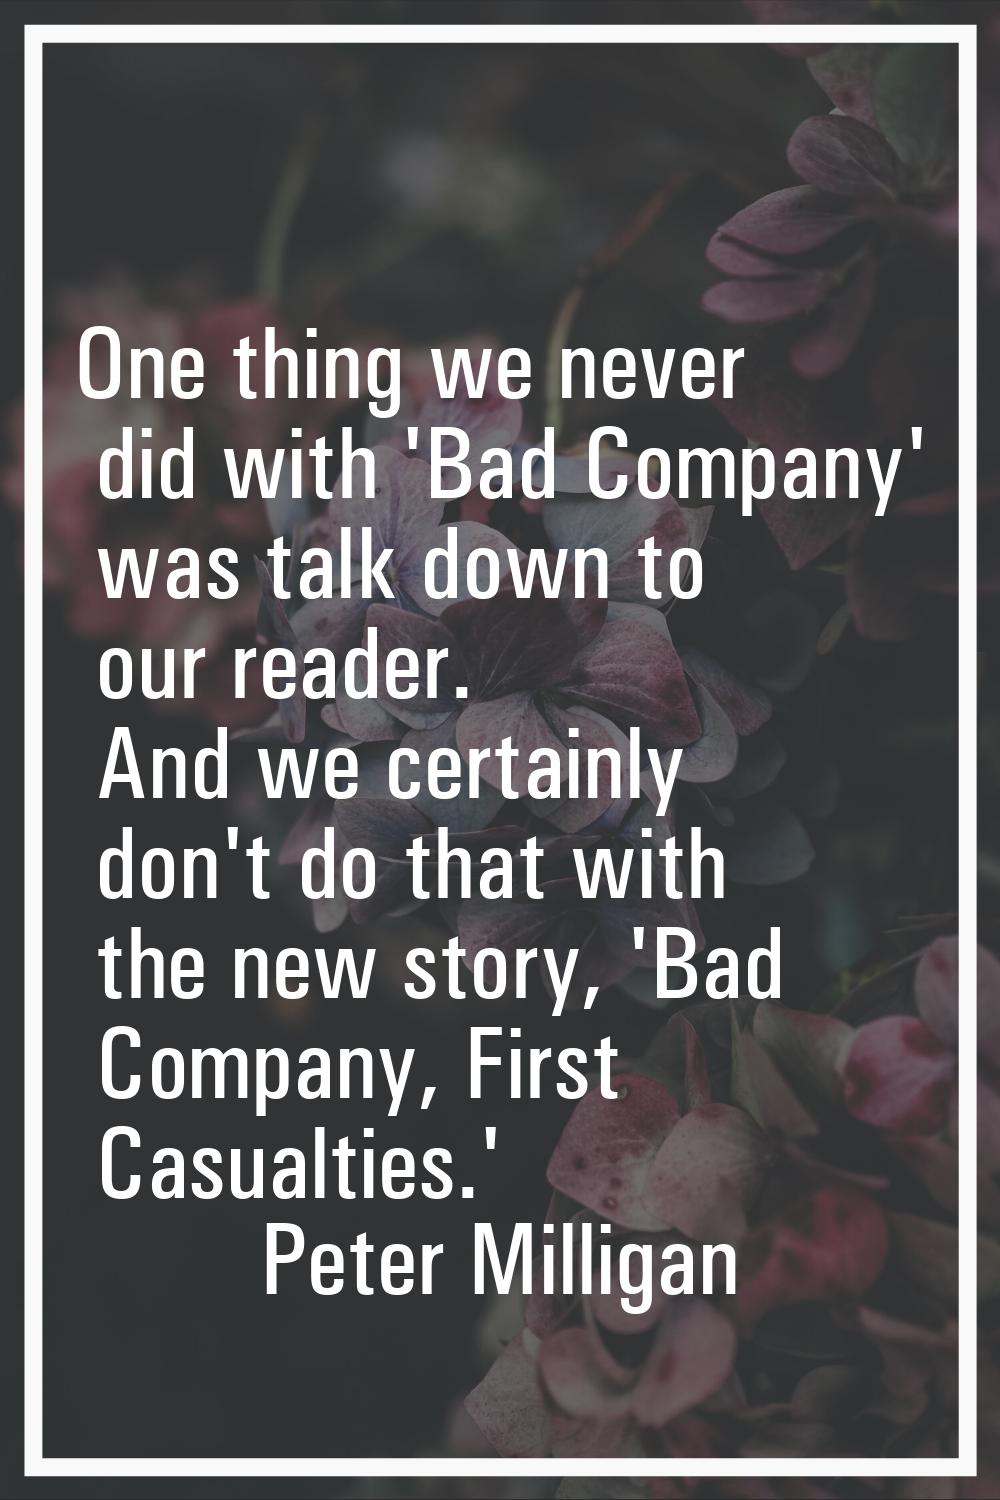 One thing we never did with 'Bad Company' was talk down to our reader. And we certainly don't do th